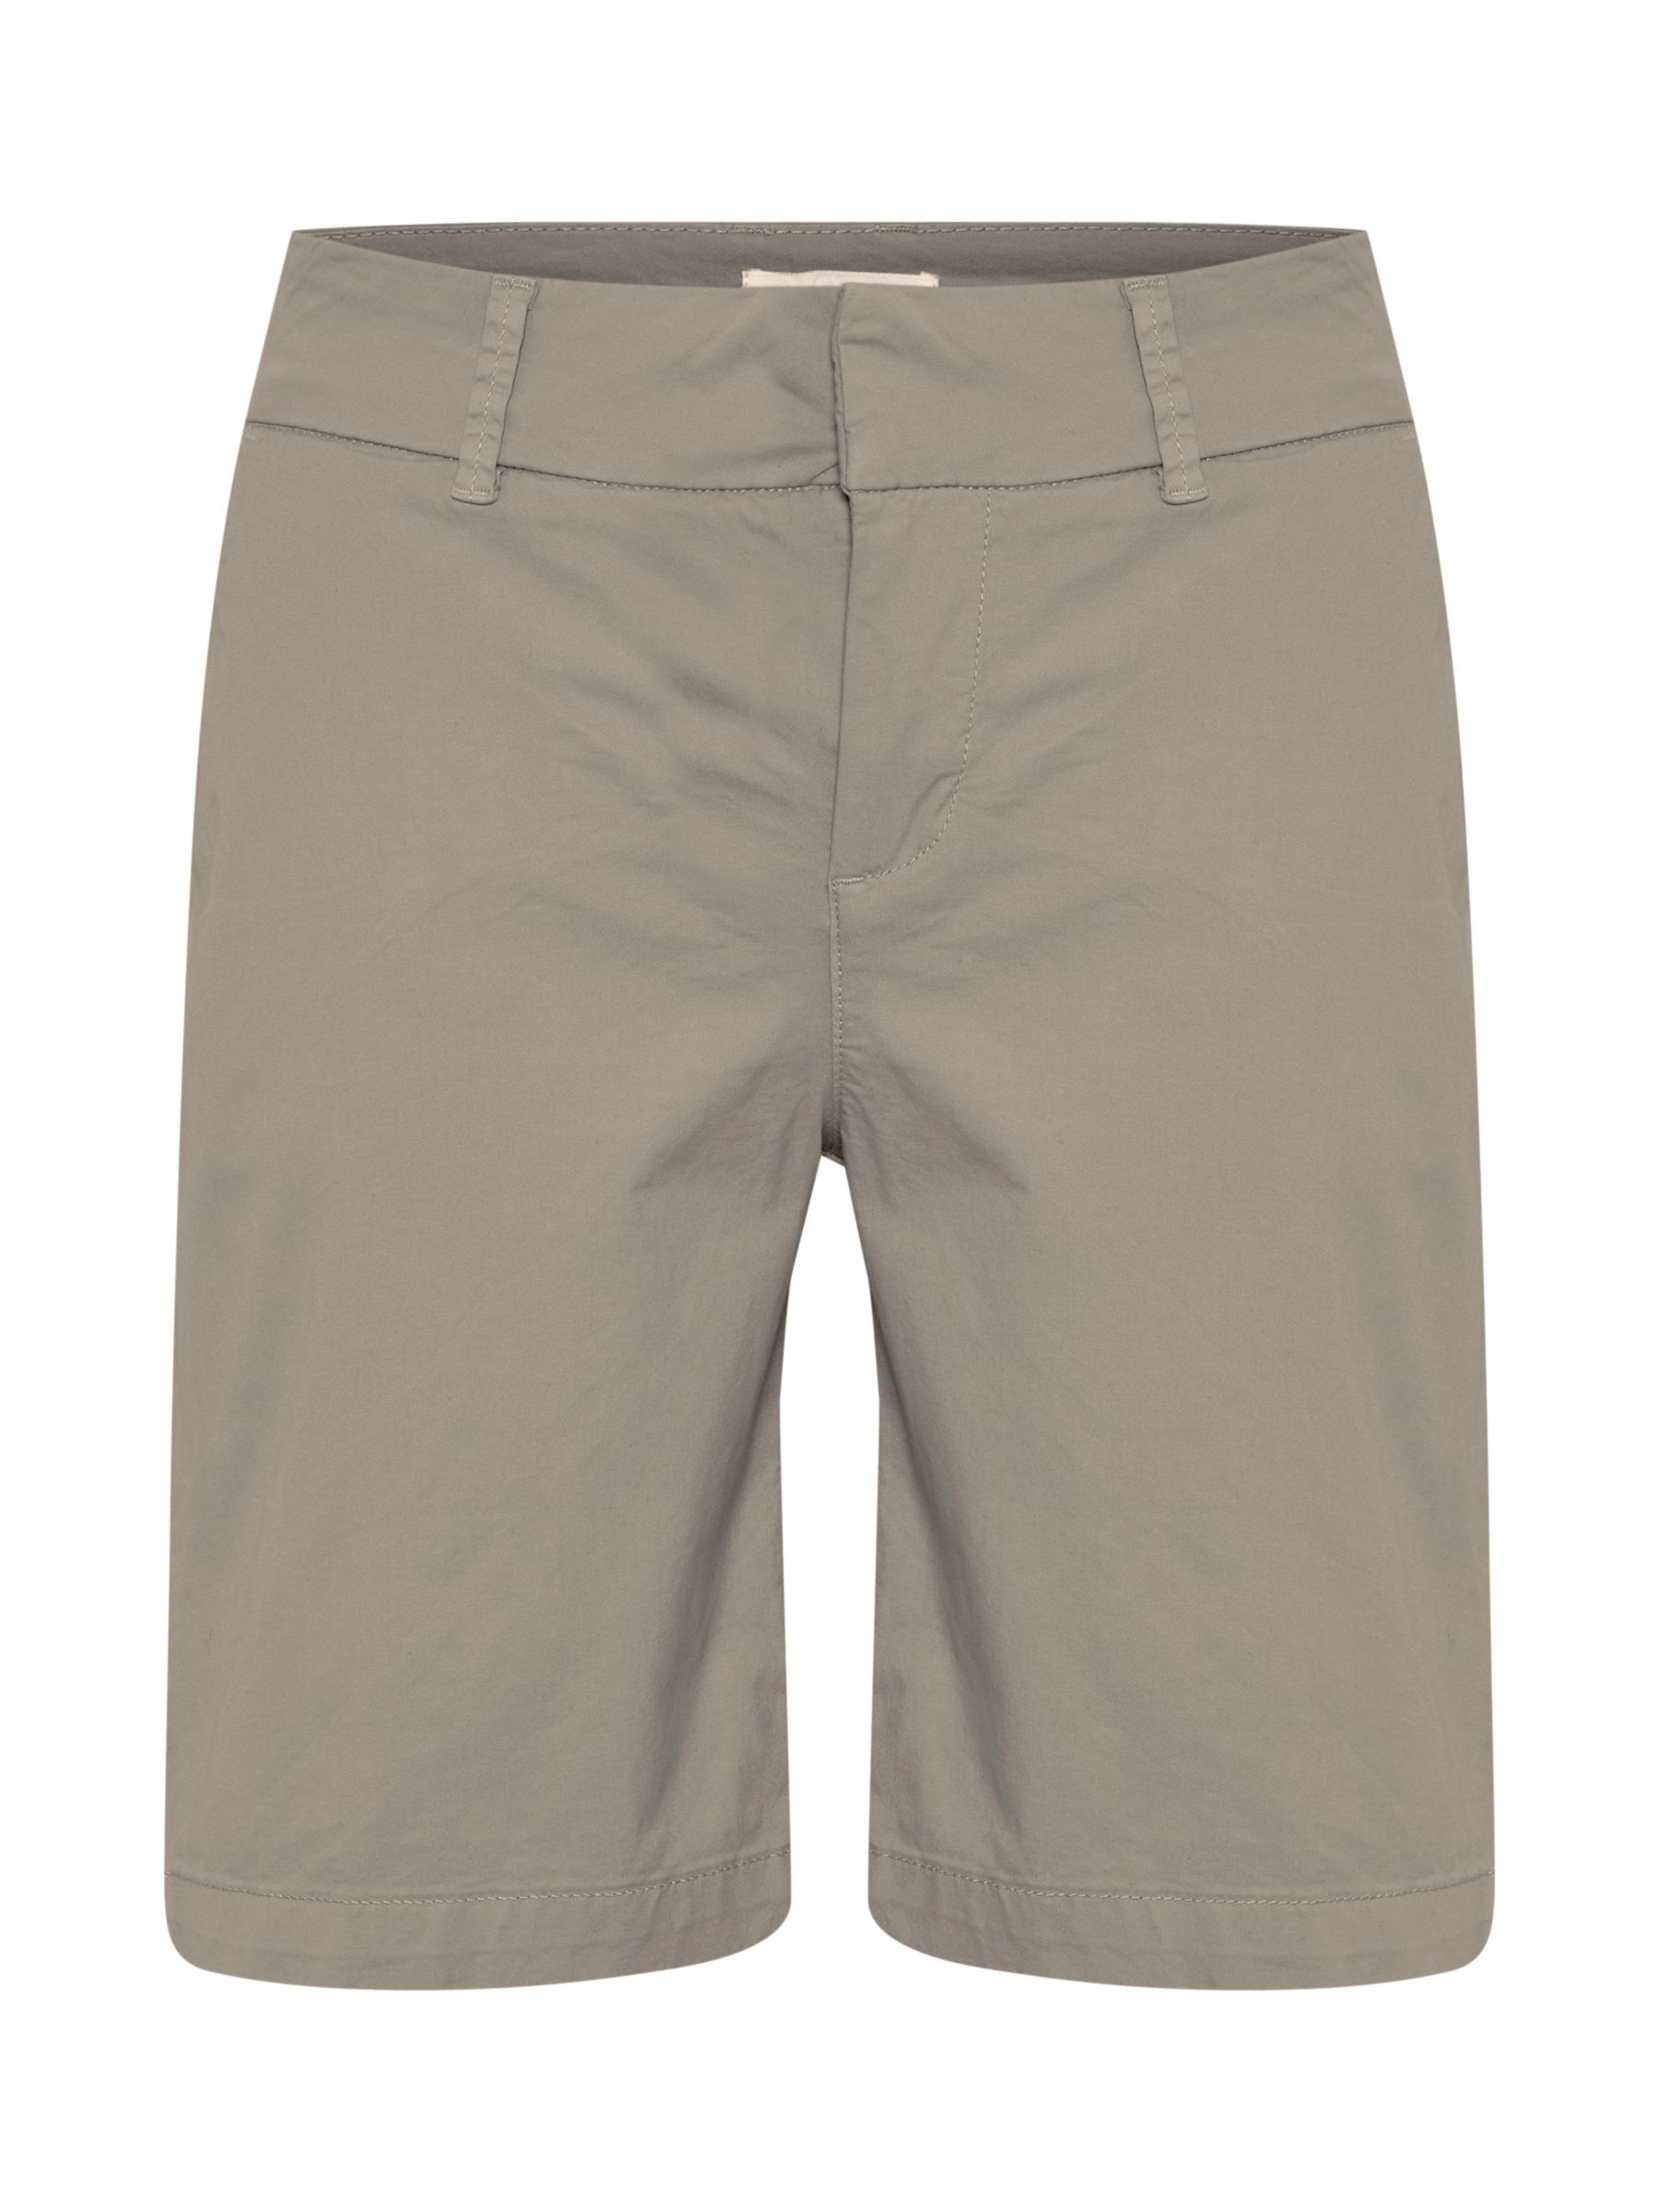 Buy Part Two Soffas Shorts Online at johnlewis.com